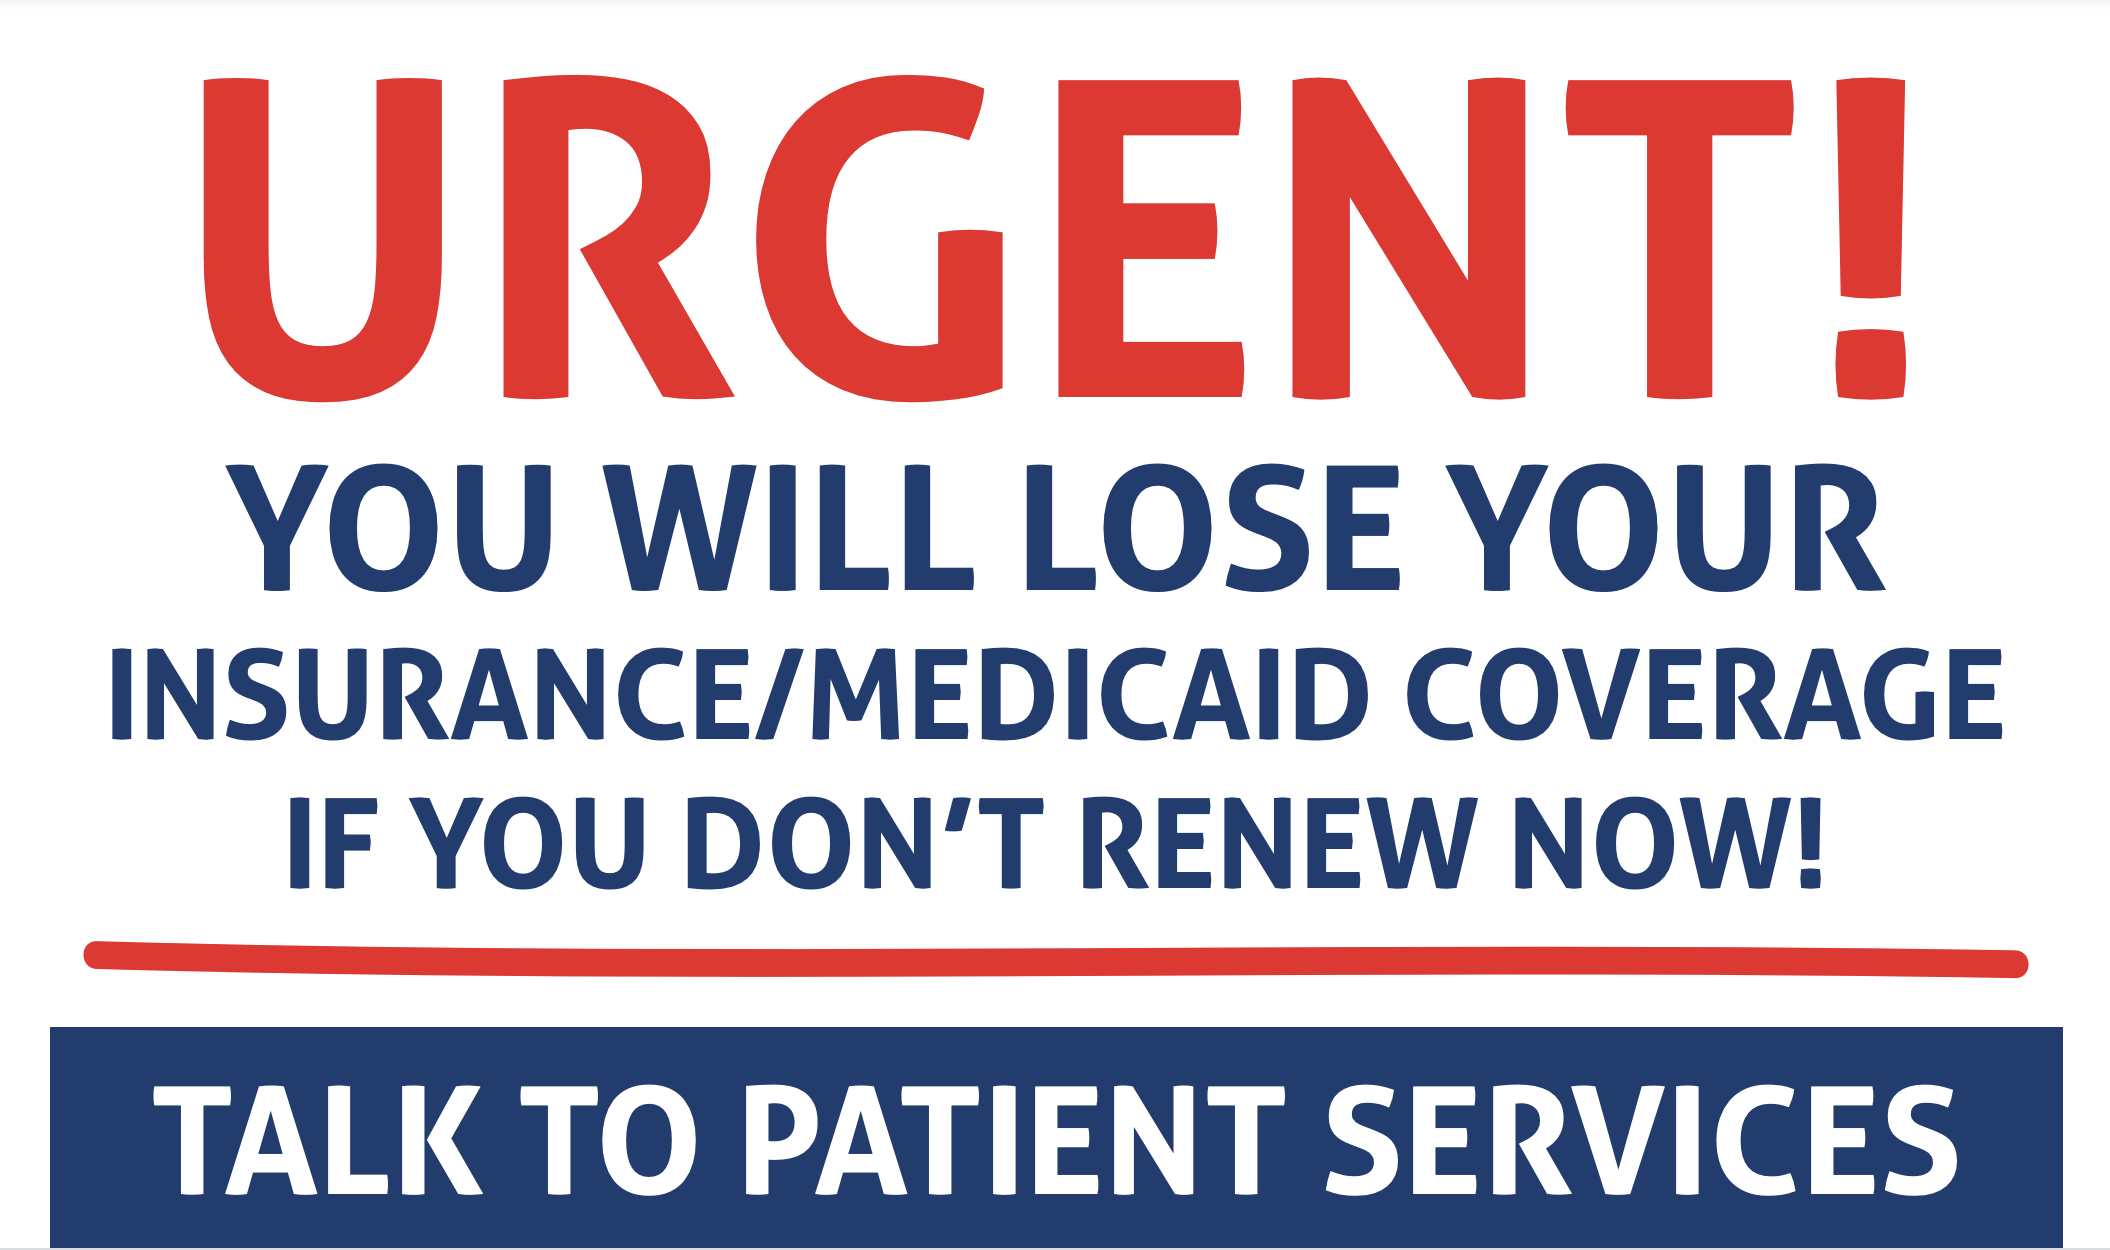 Reminder to renew Medicaid or insurance.